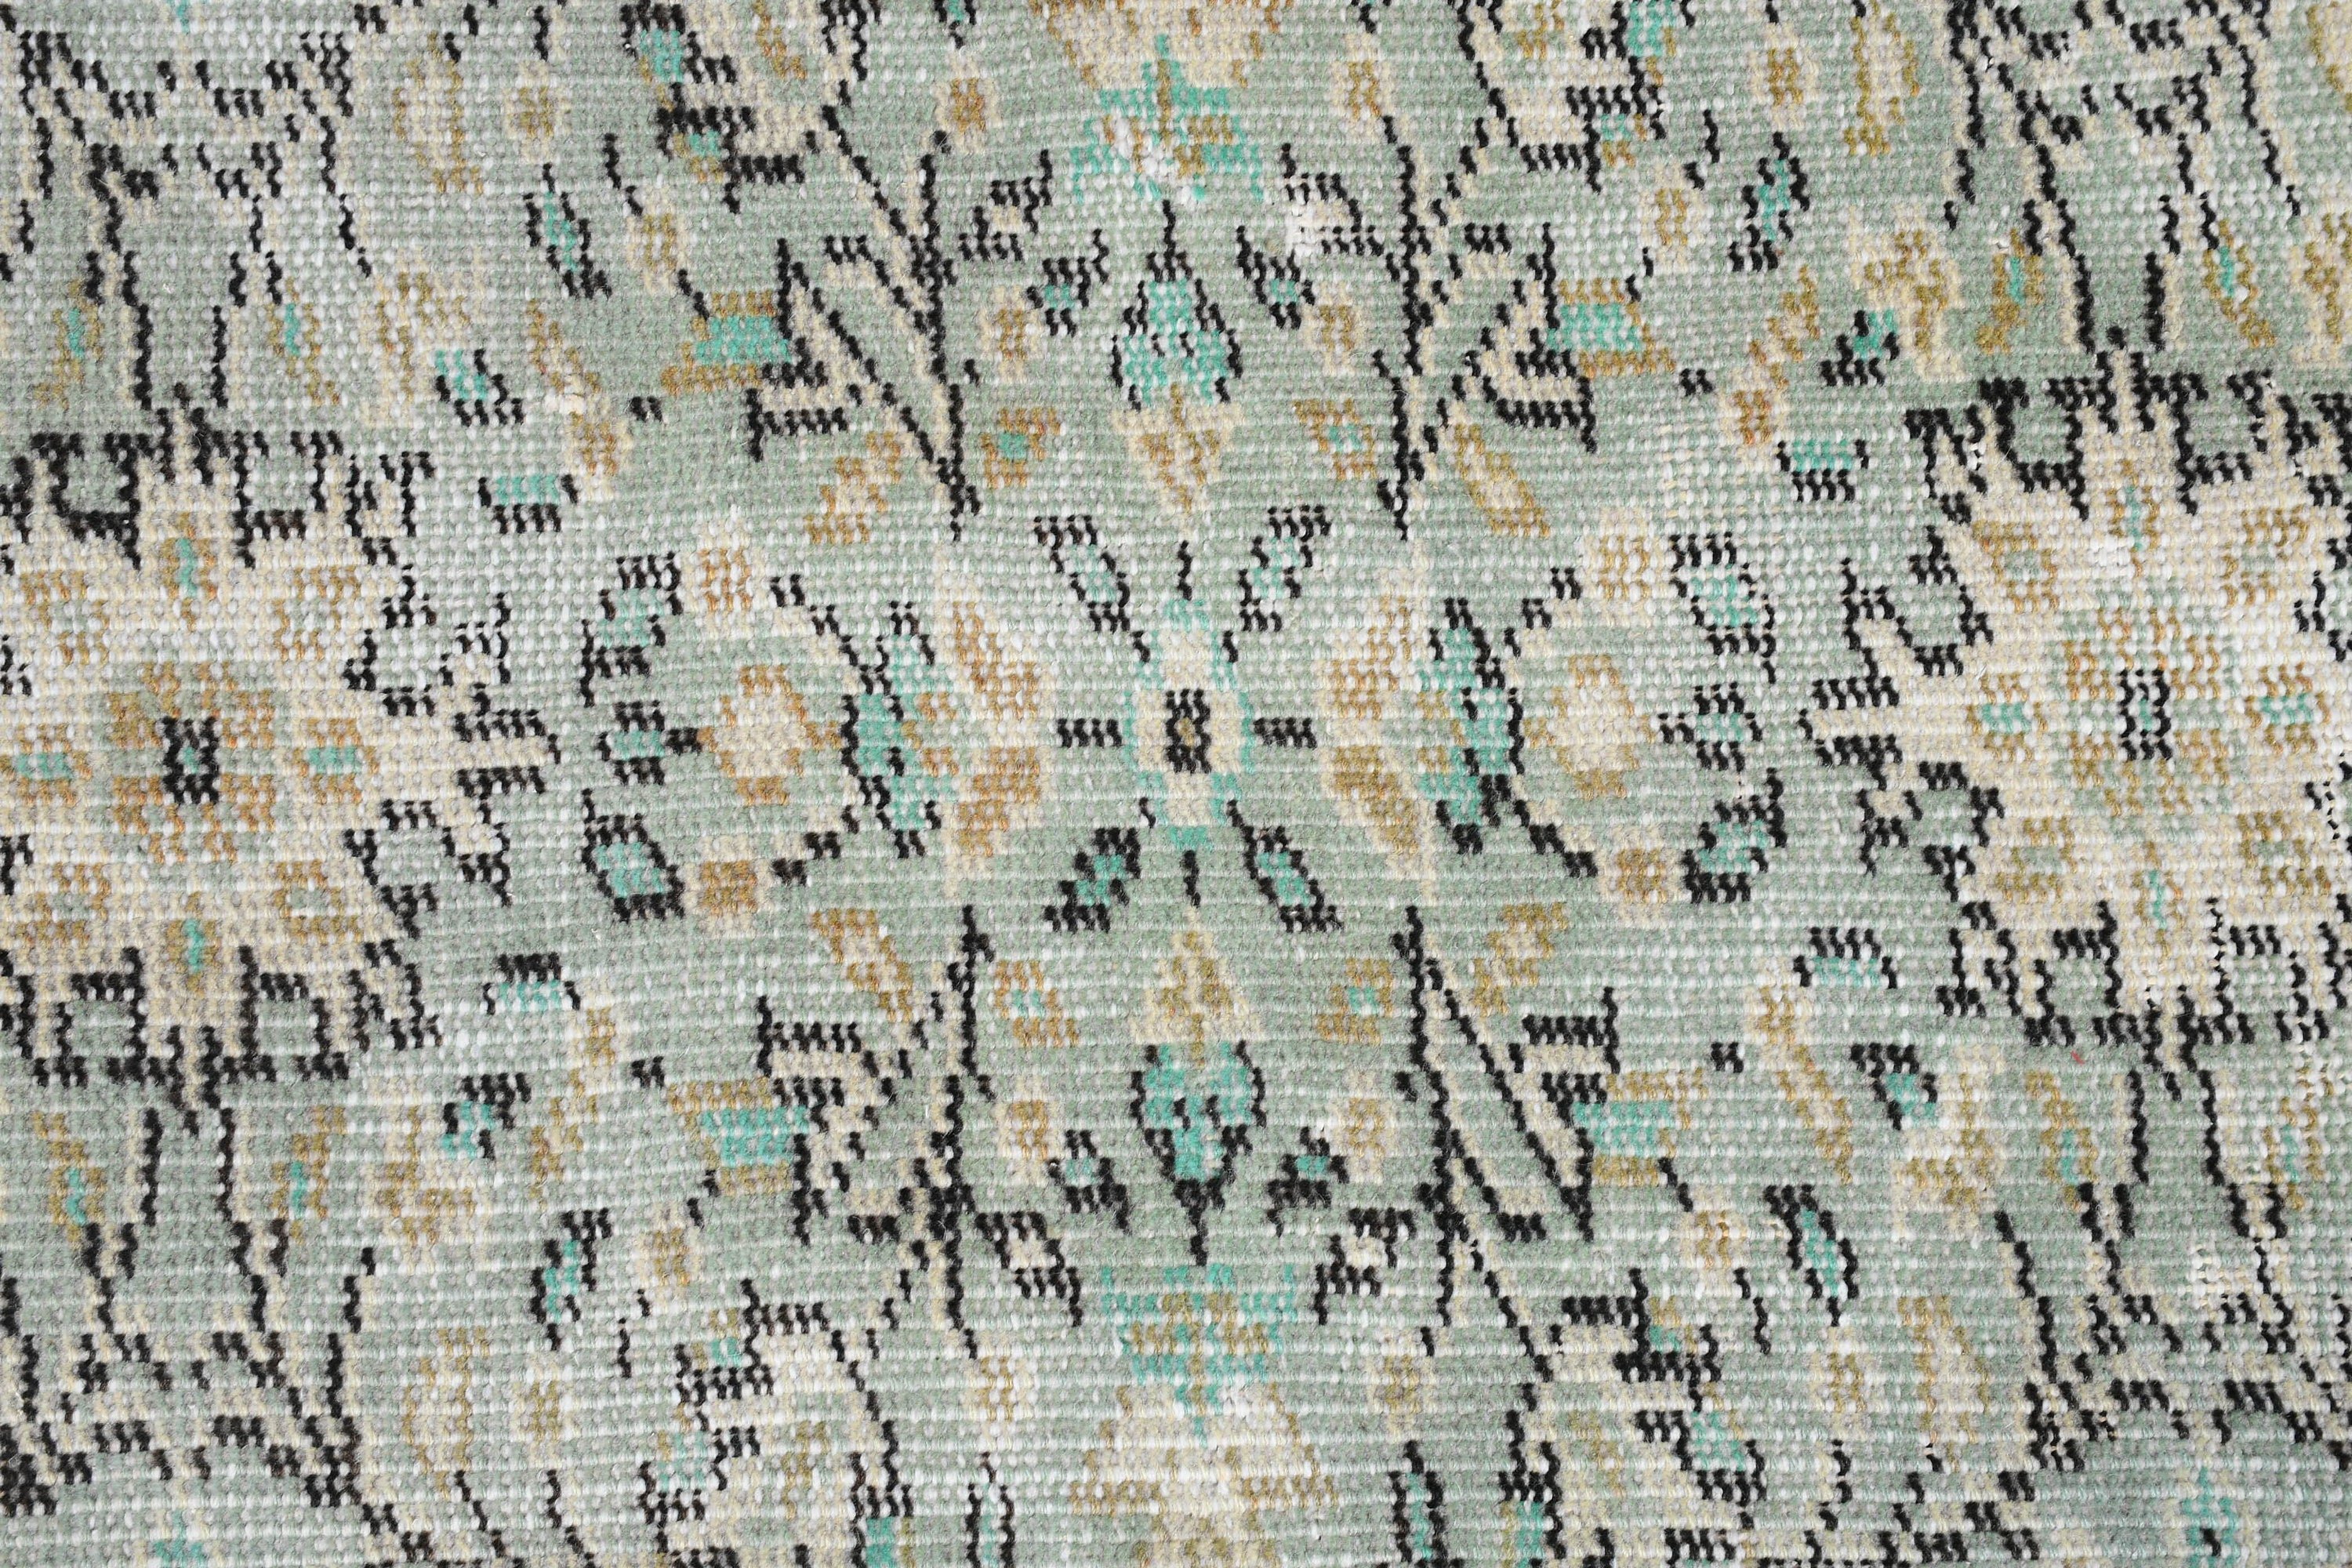 Home Decor Rugs, Entry Rugs, Green  2.8x6.4 ft Accent Rug, Turkish Rug, Vintage Rugs, Nursery Rugs, Rugs for Entry, Cool Rugs